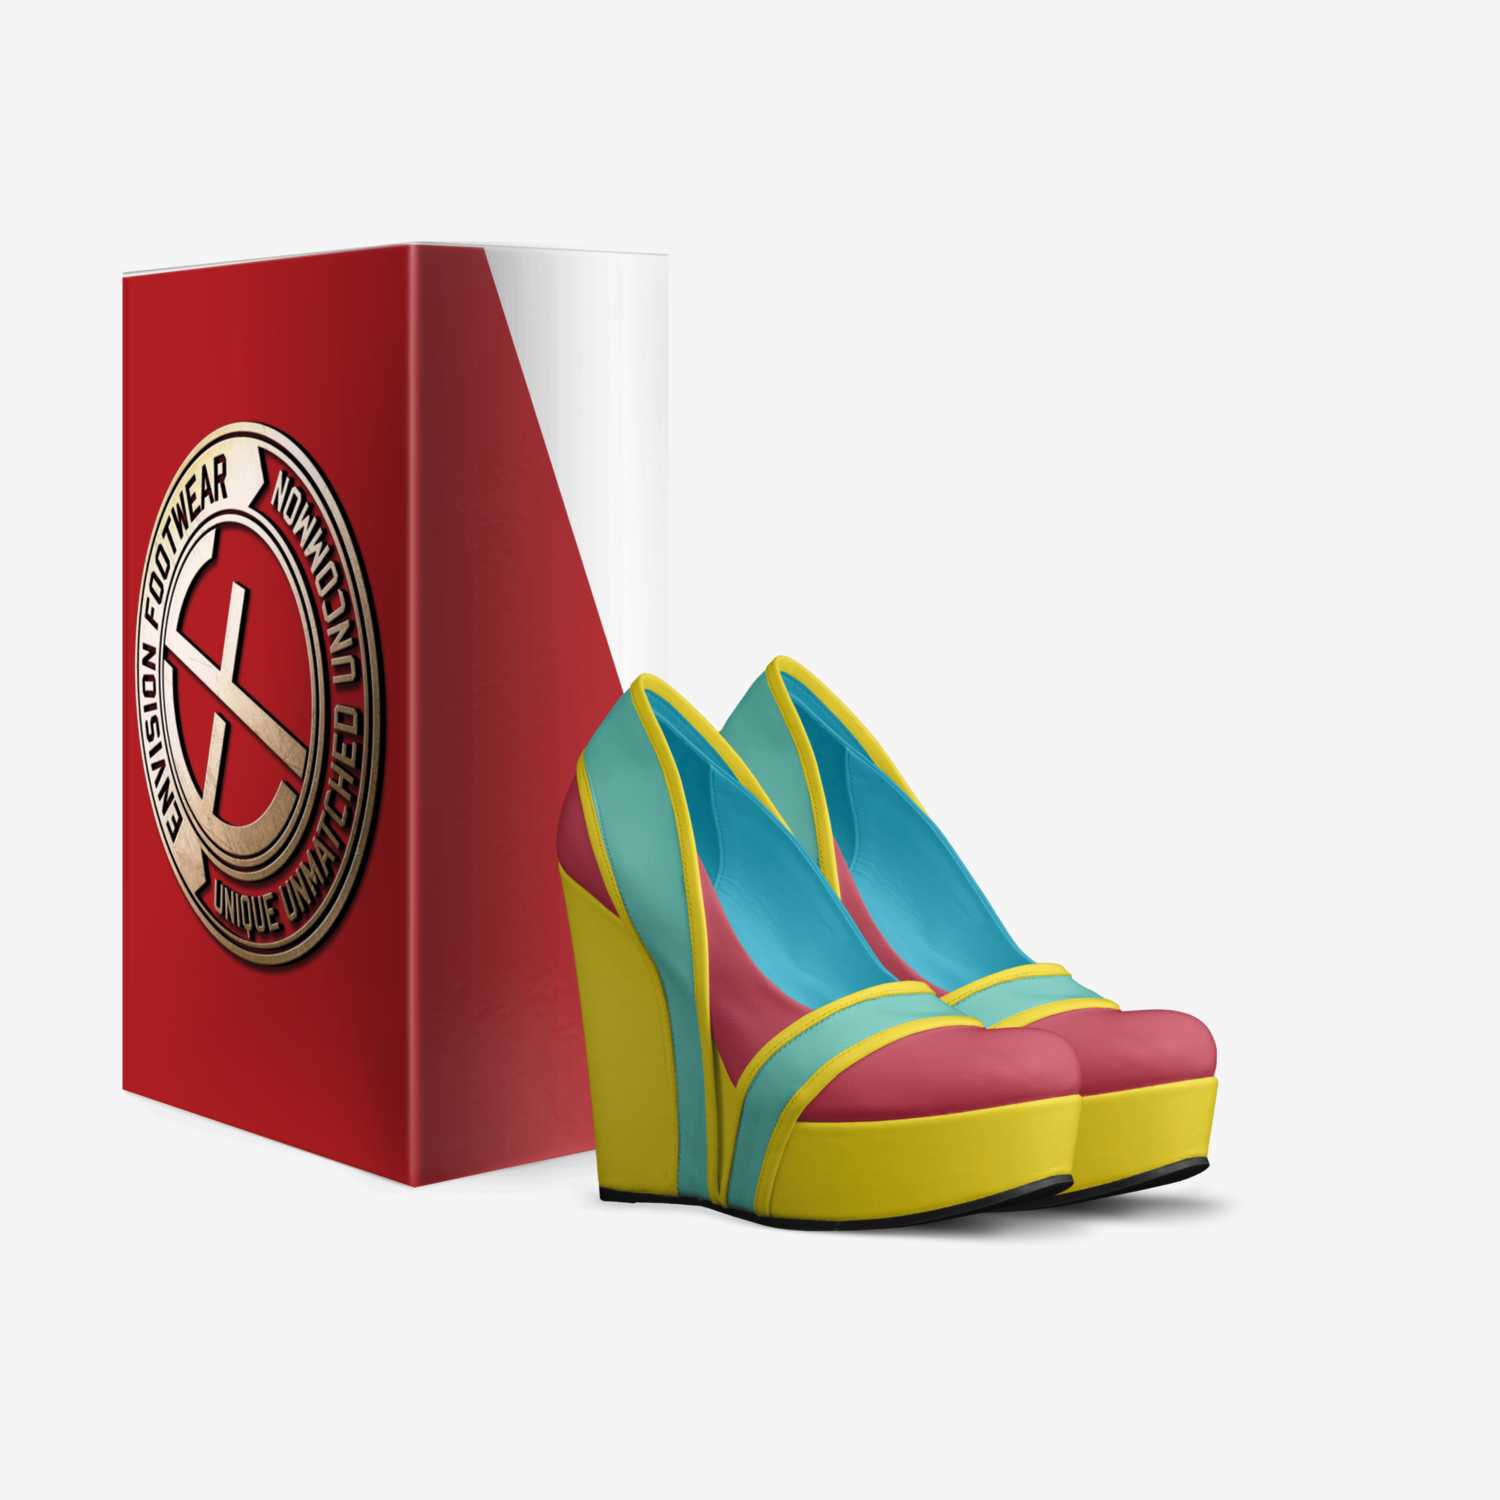 Str8 Diva custom made in Italy shoes by Ureal Irving Iii | Box view